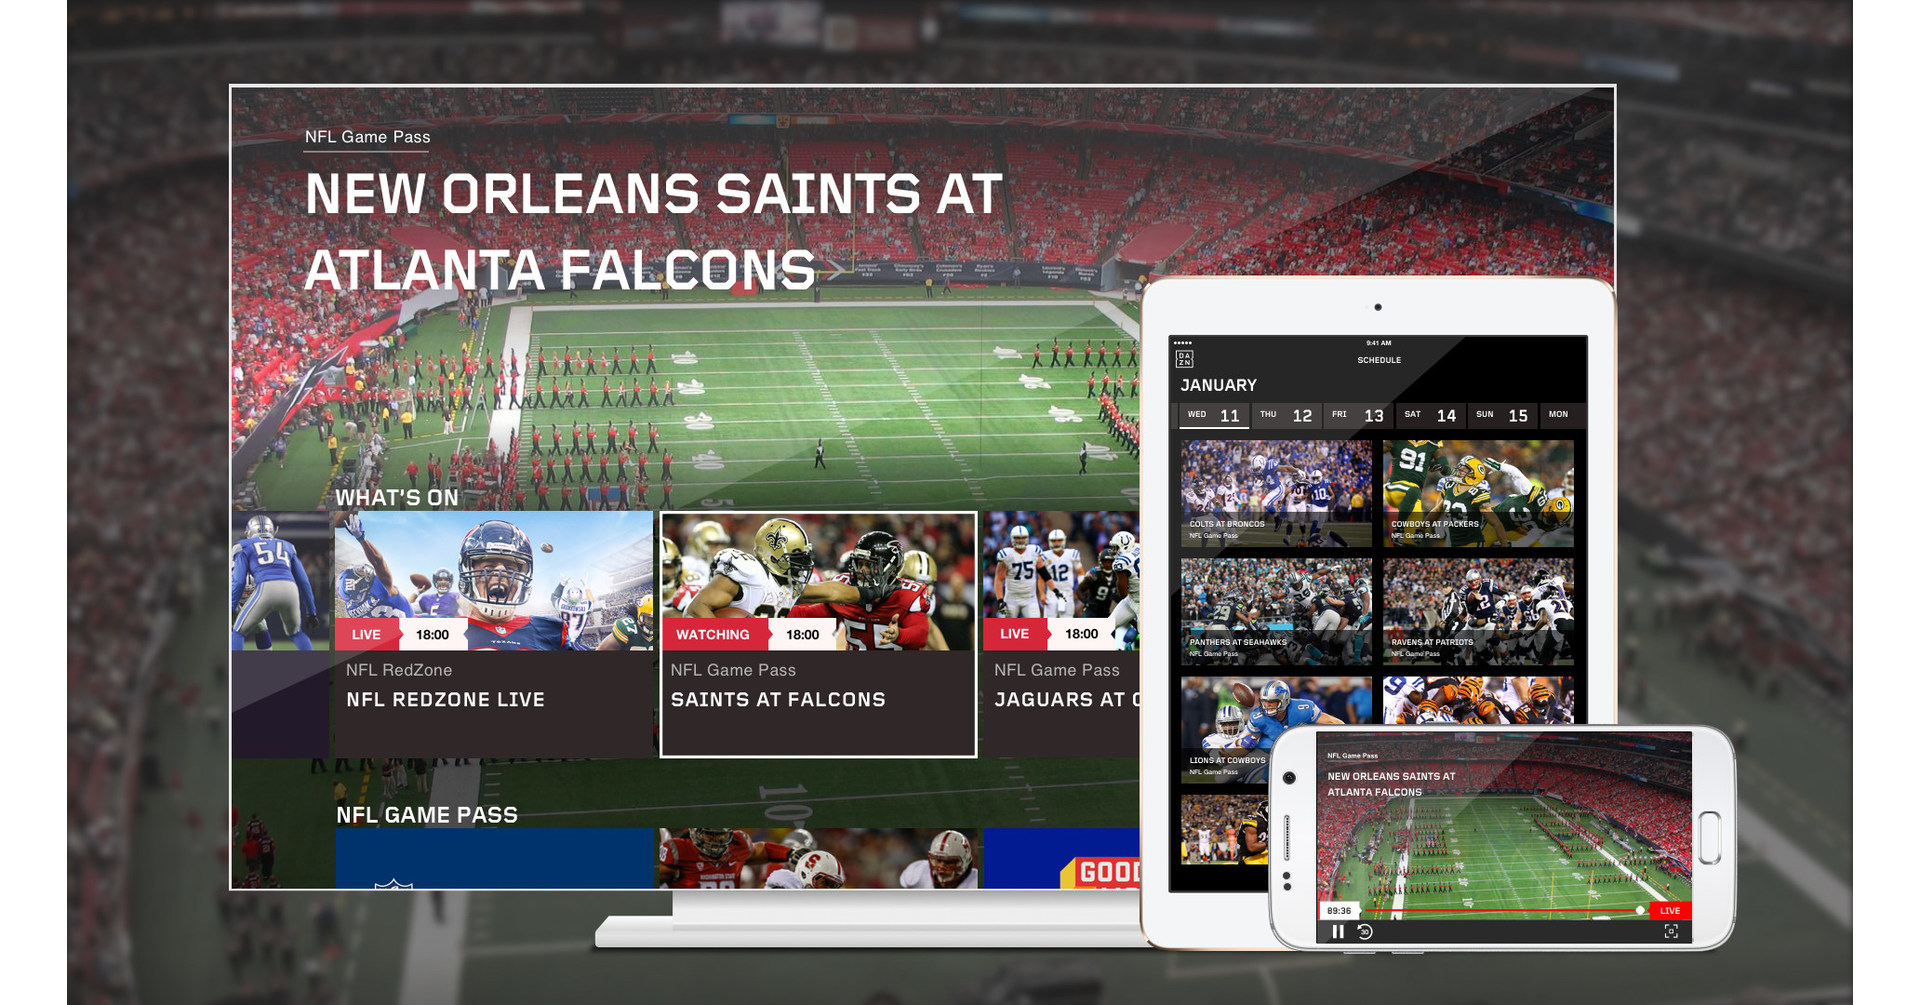 Live Sports Streaming Service DAZN Launches with Exclusive NFL Game Pass  and NFL Redzone Rights in Canada